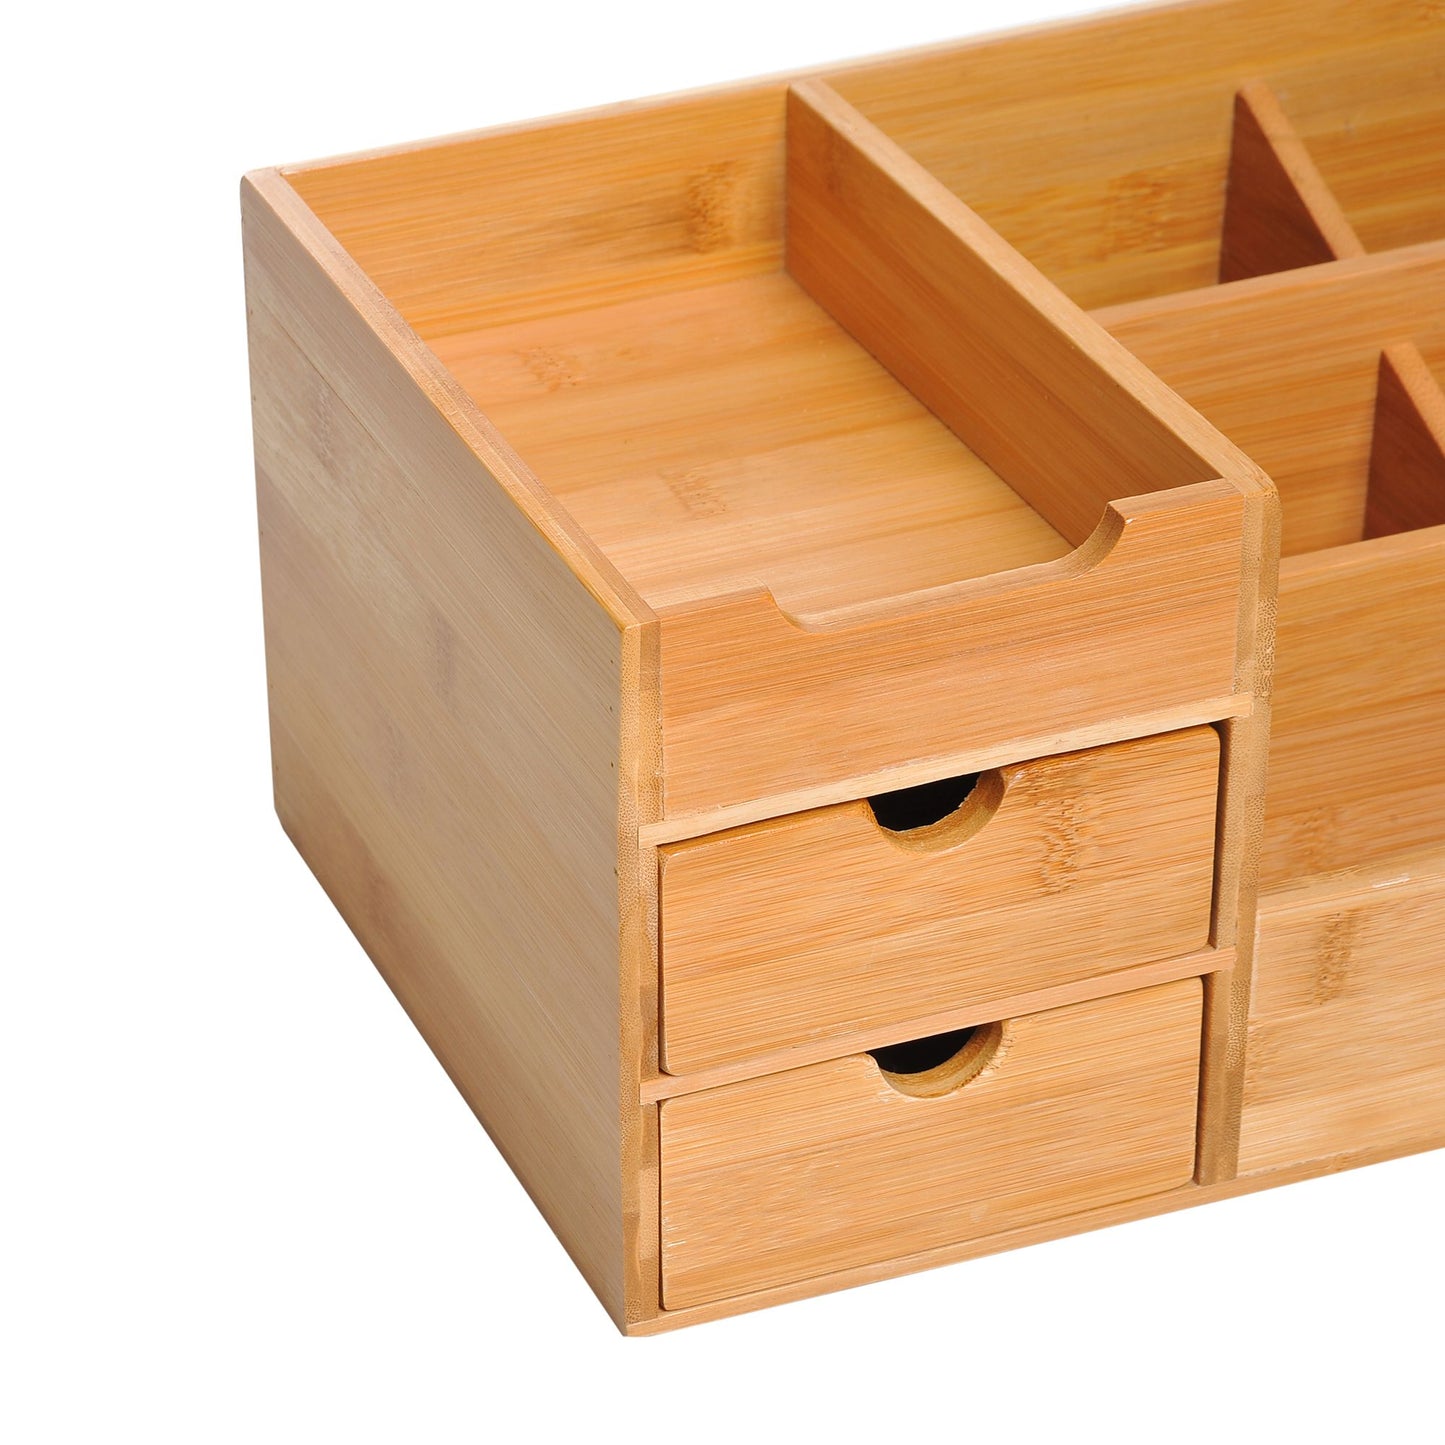 ProperAV Extra Multi-Function Storage Organiser with 7 Storage Compartments & 2 Drawers - Bamboo - maplin.co.uk